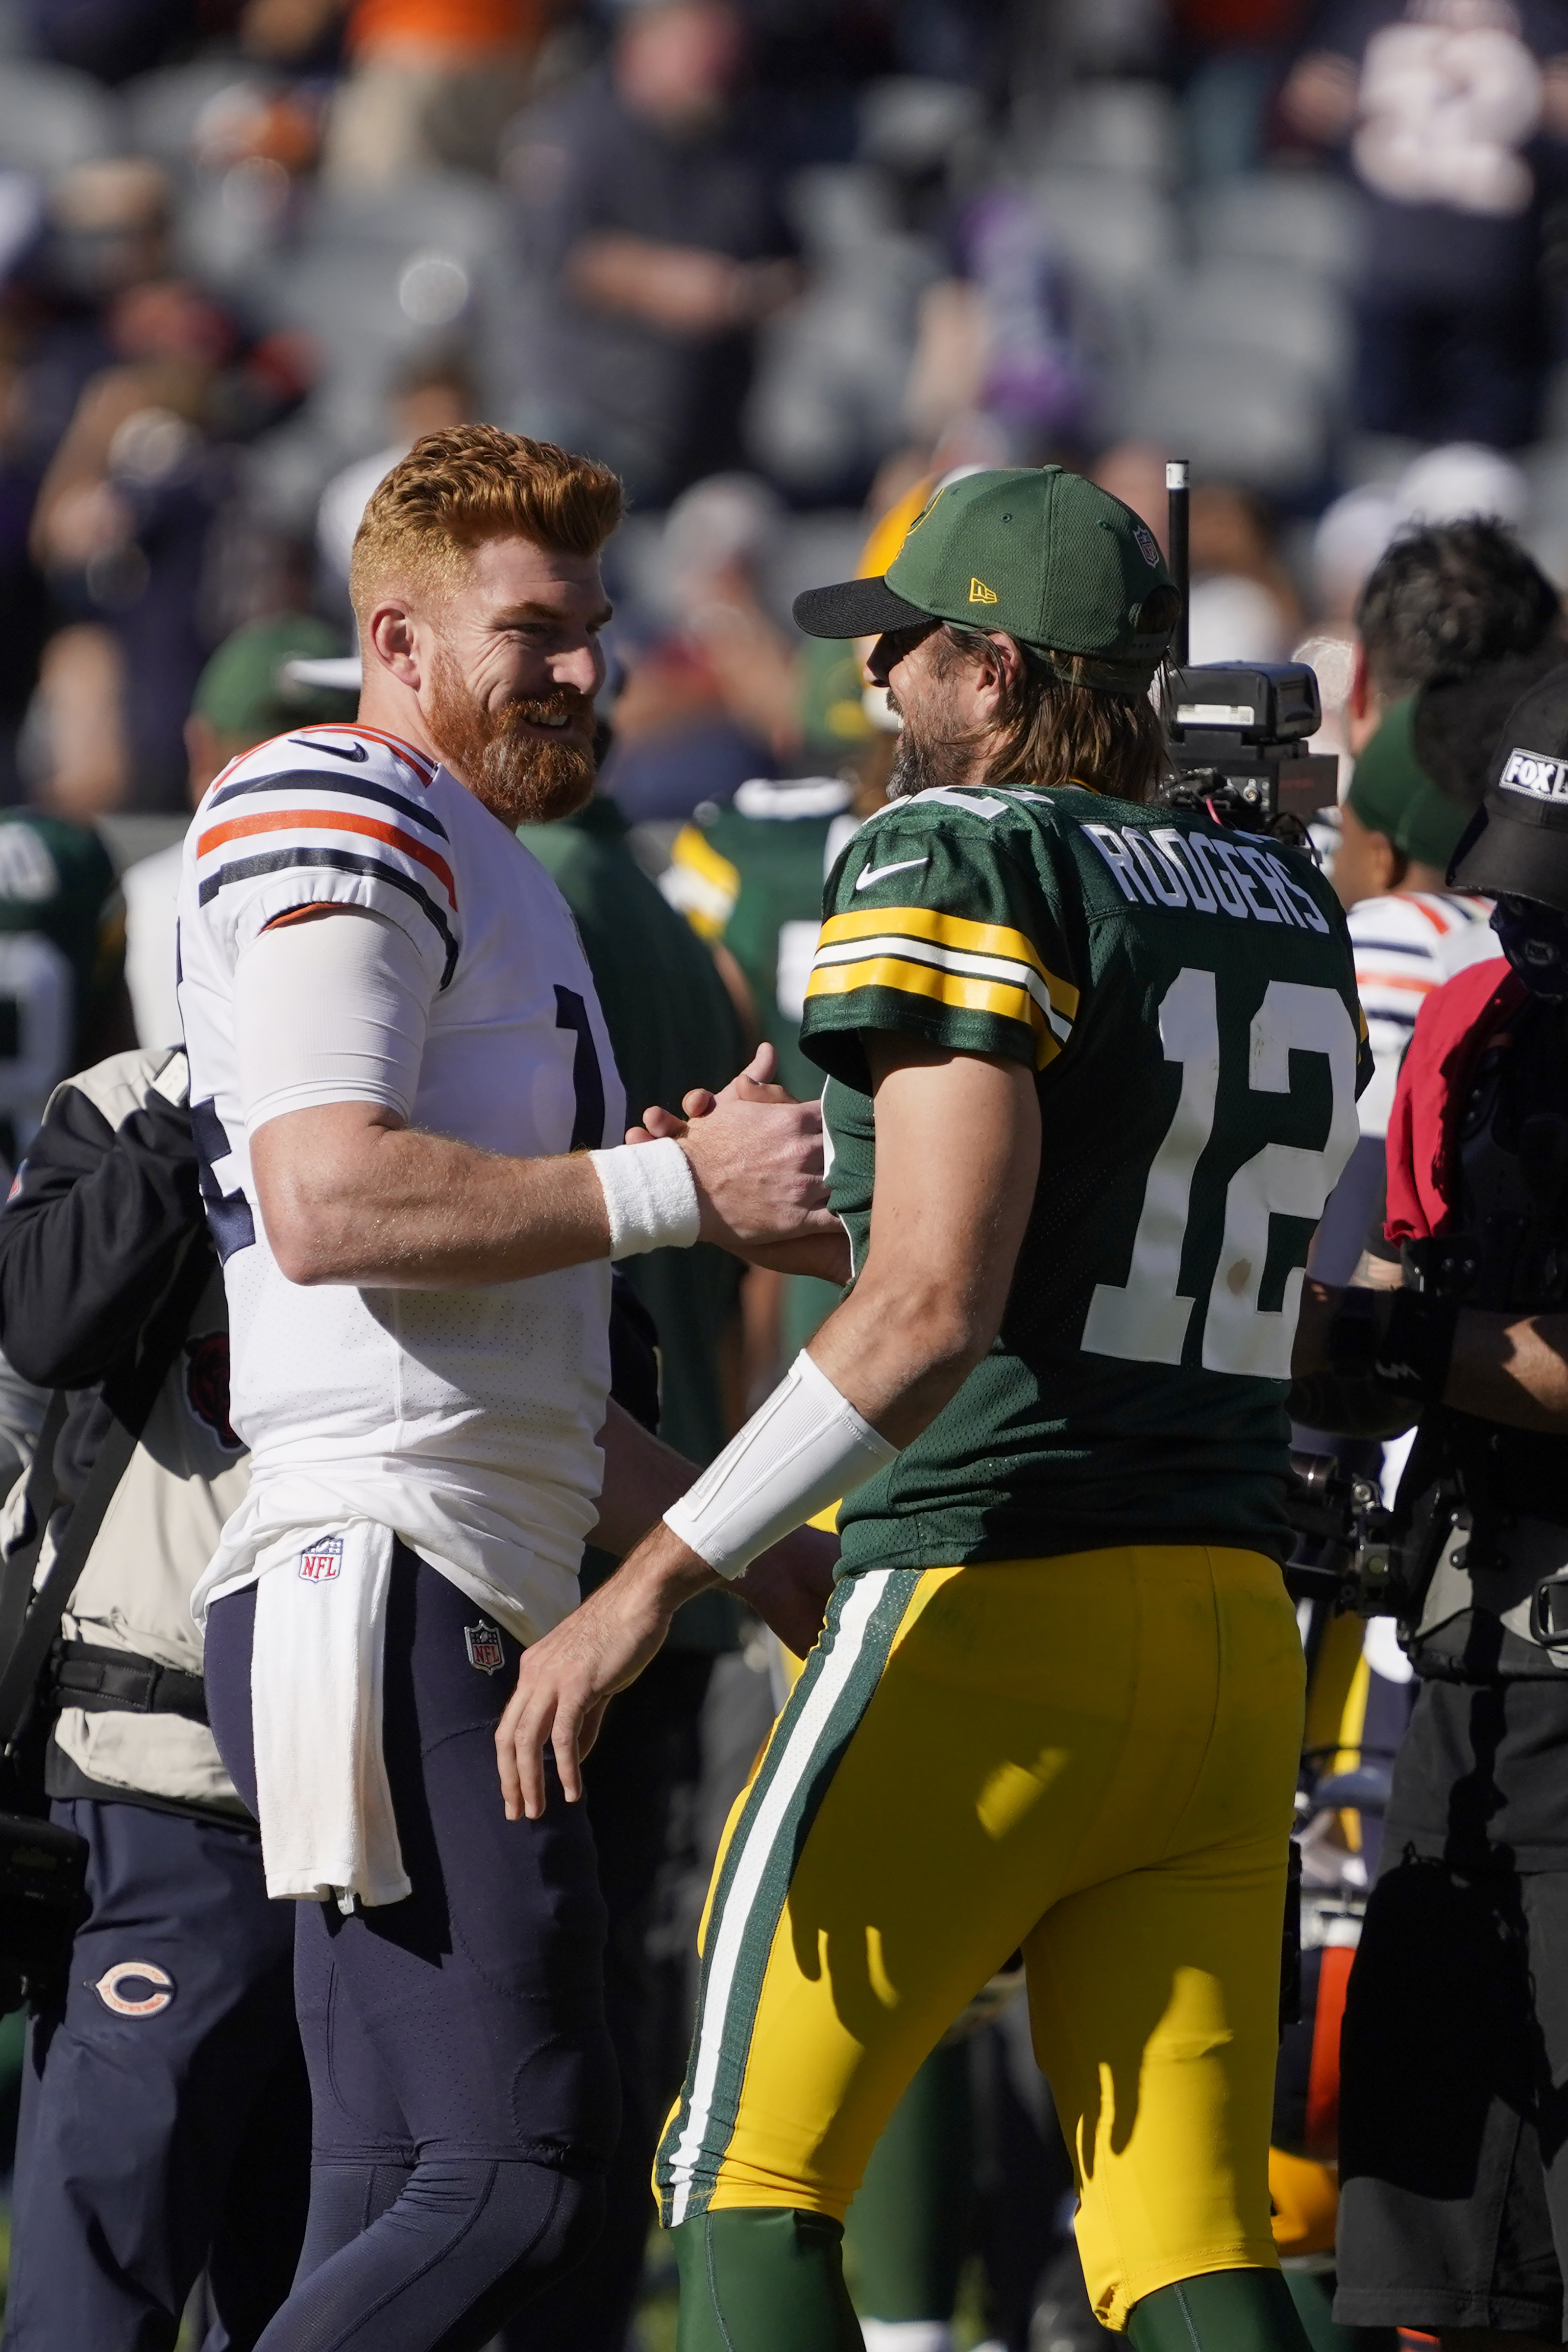 Rodgers Throws 2 TDs, Runs for 1 as Packers Beat Bears 24-14